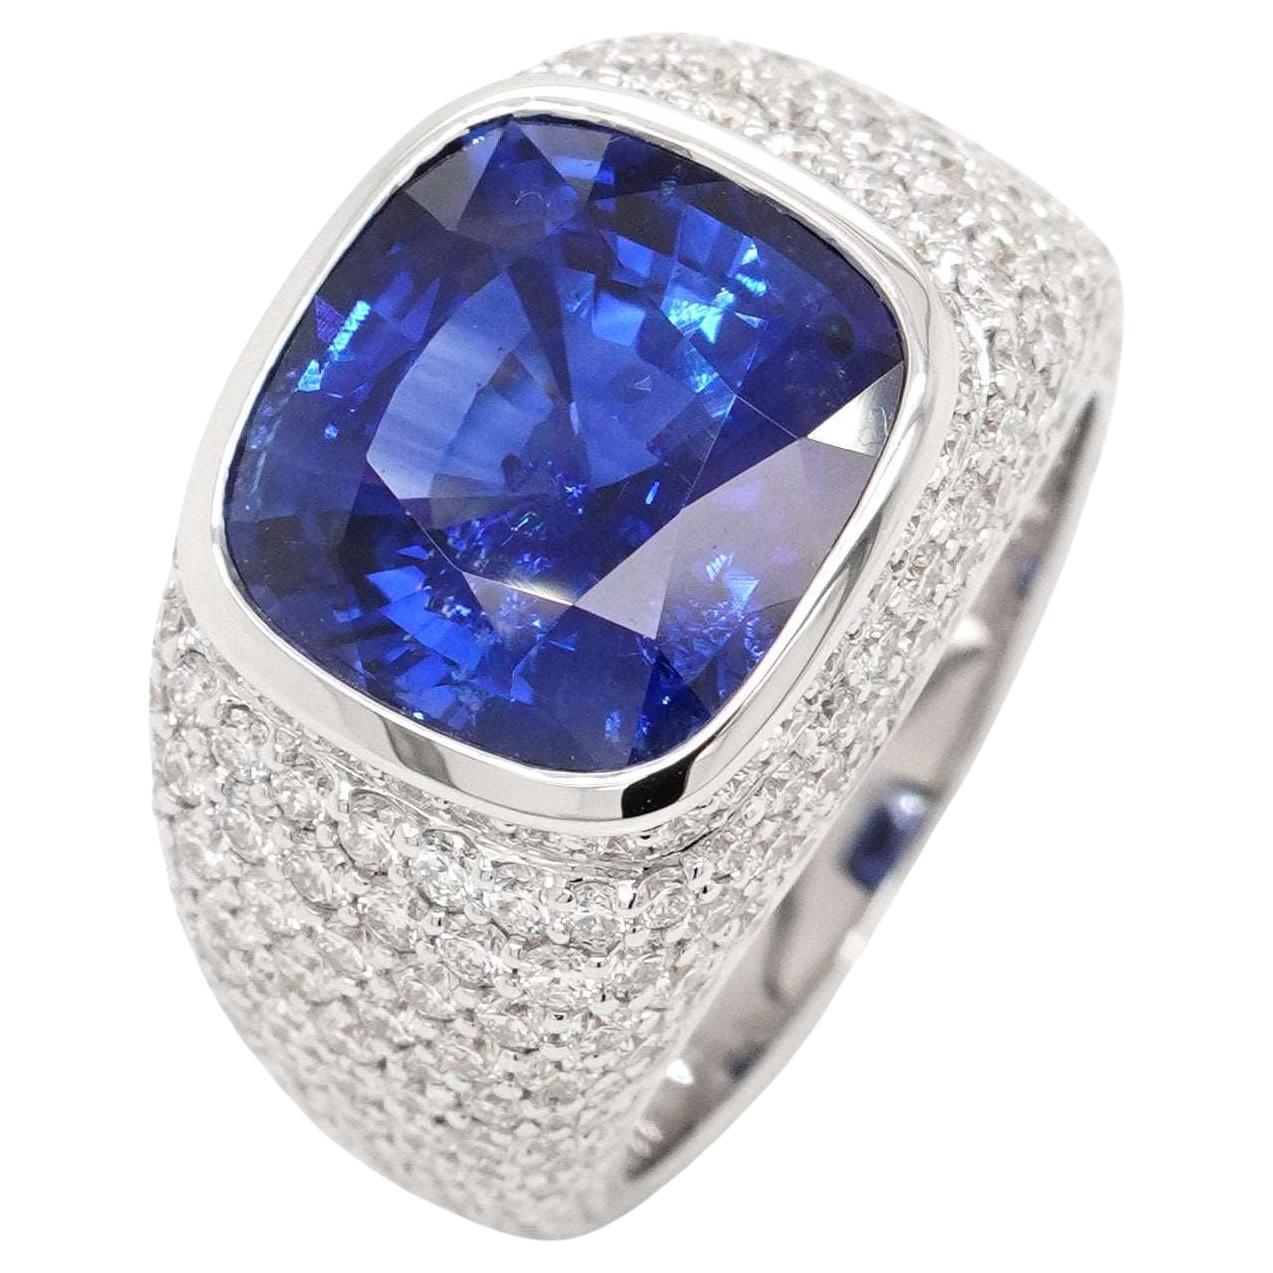 BENJAMIN FINE JEWELRY 7.31 cts Blue Sapphire with White Diamond Pavé 18K Ring For Sale